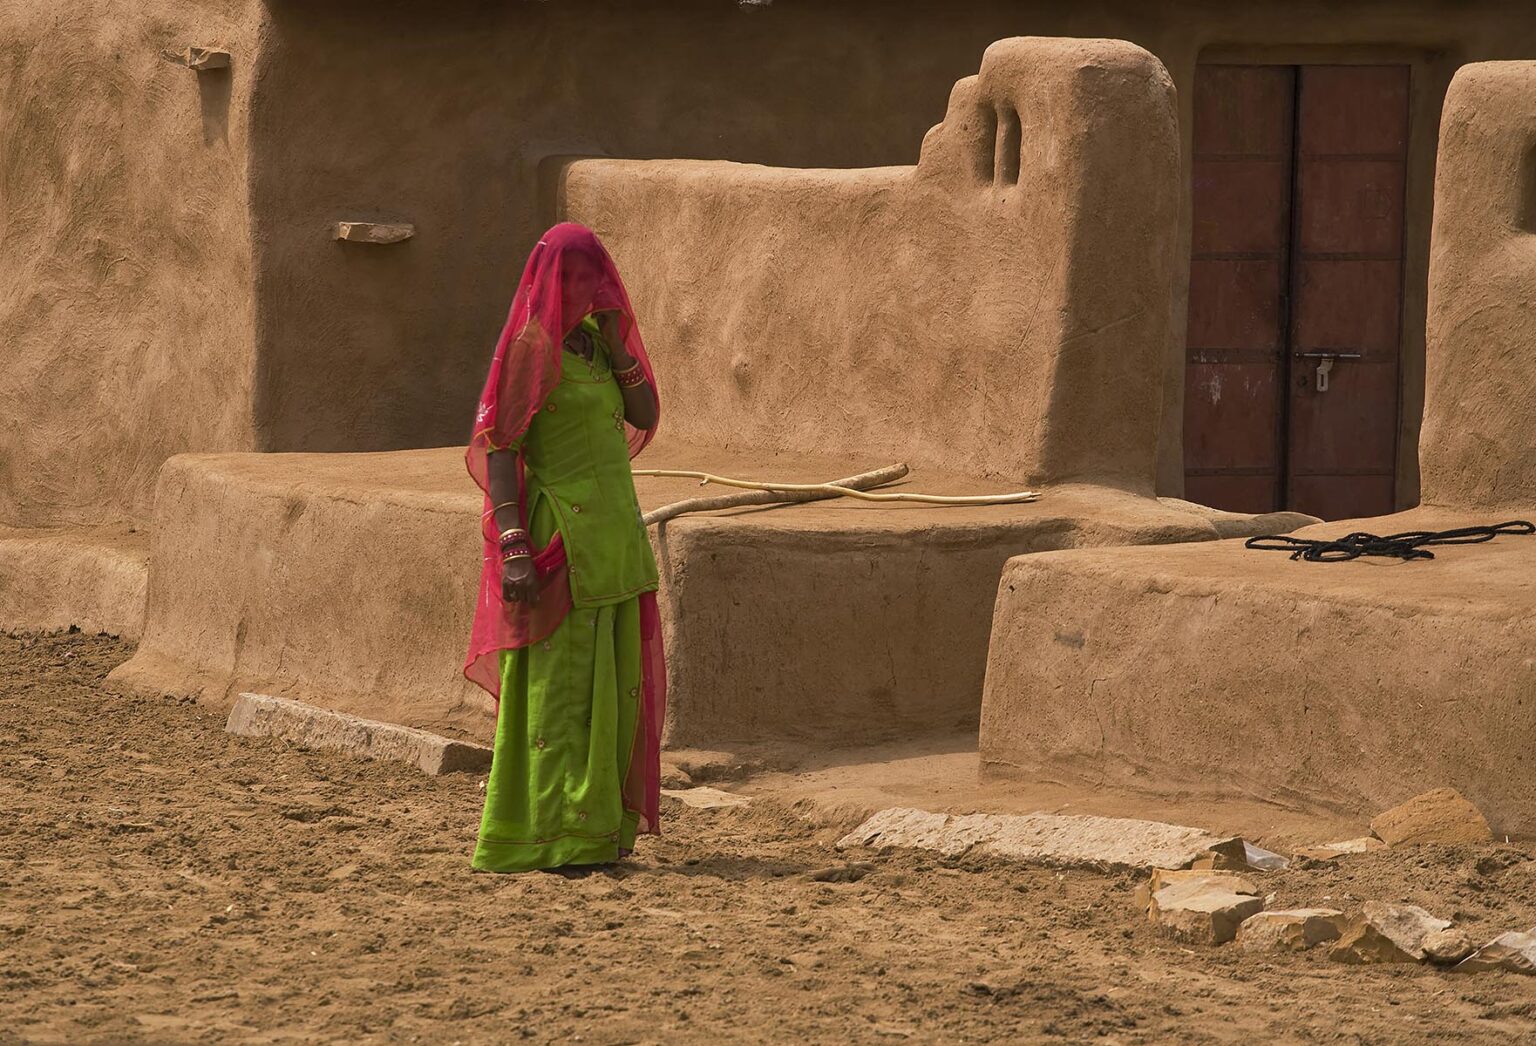 A BANJARI TRIBAL WOMAN and her classic MUD HOUSE in a village in the THAR DESERT near JAISALMER - RAJASTHAN, INDIA